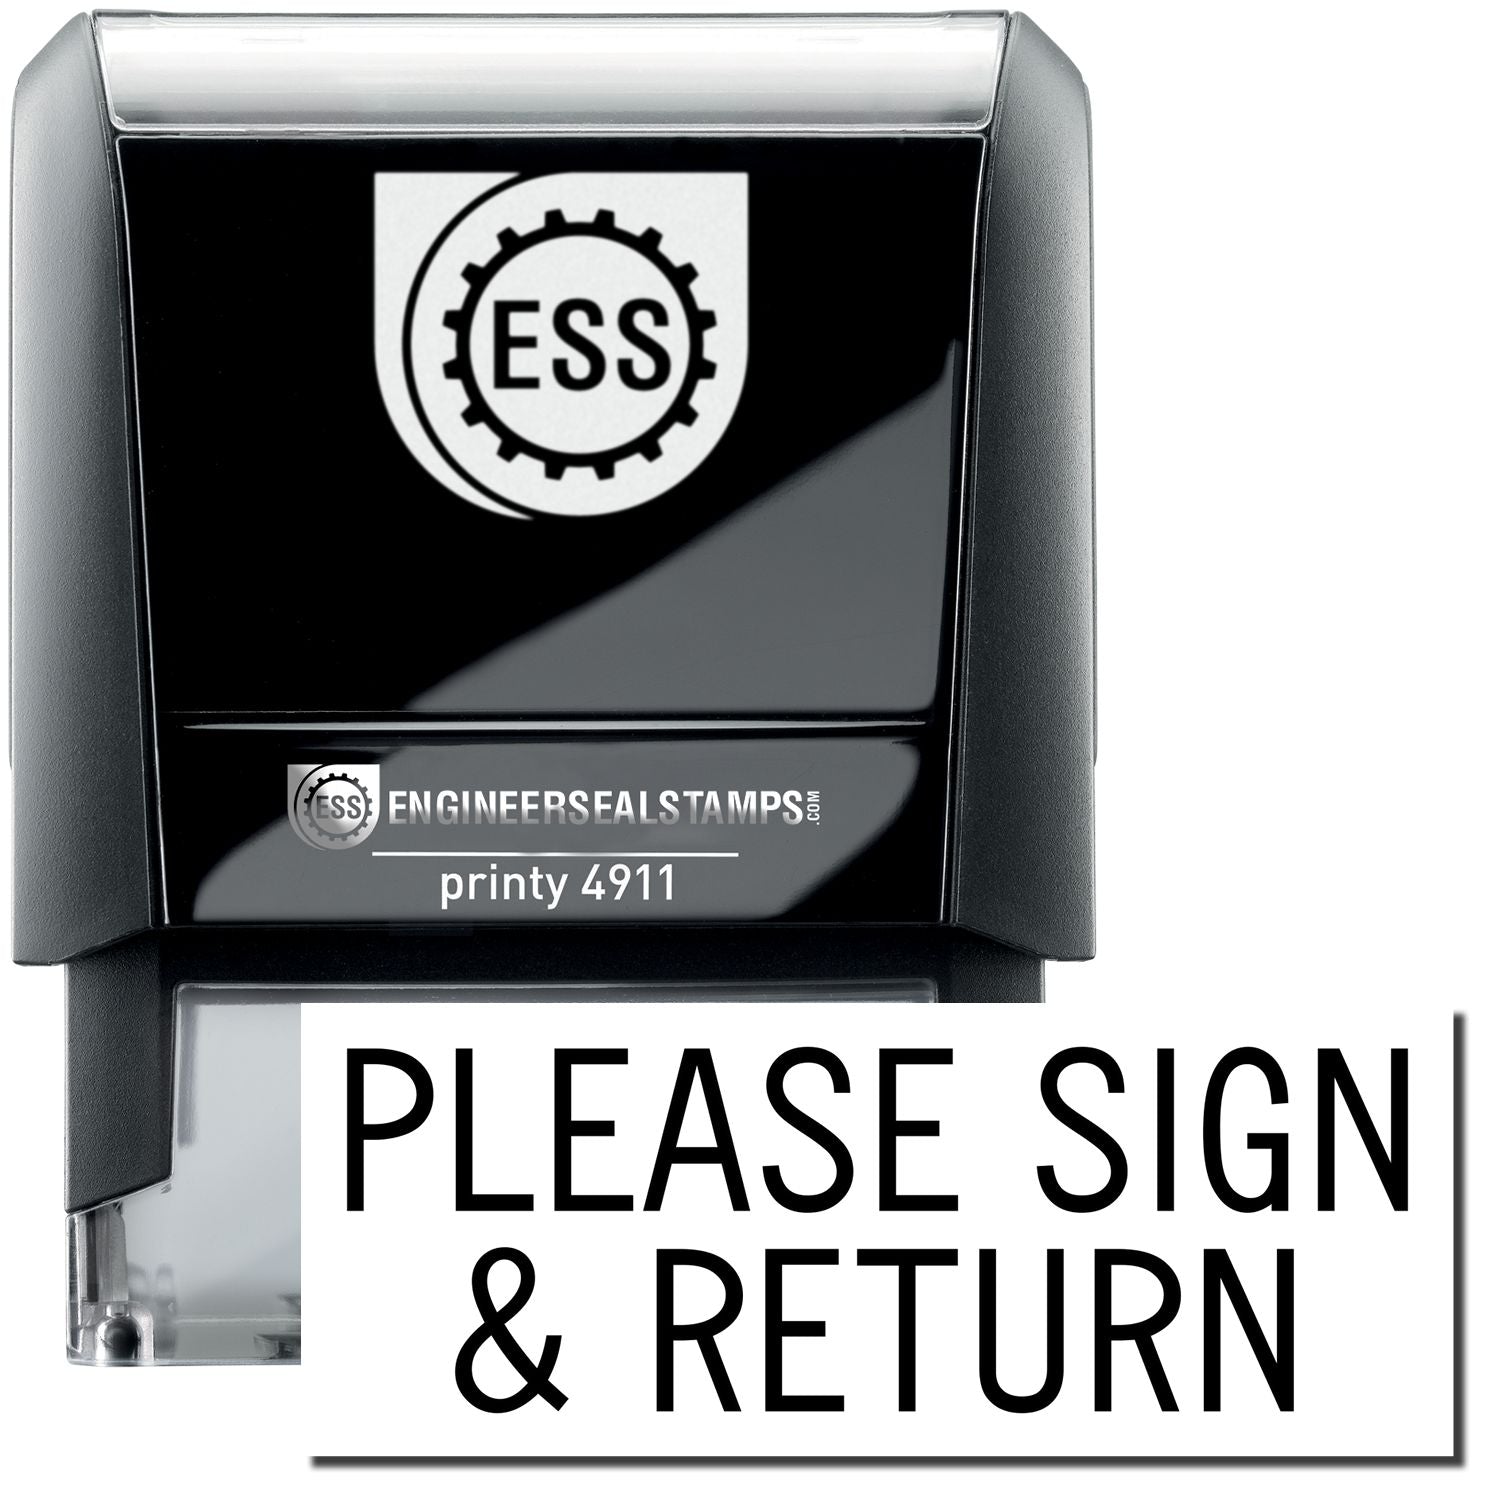 A self-inking stamp with a stamped image showing how the text "PLEASE SIGN & RETURN" is displayed after stamping.